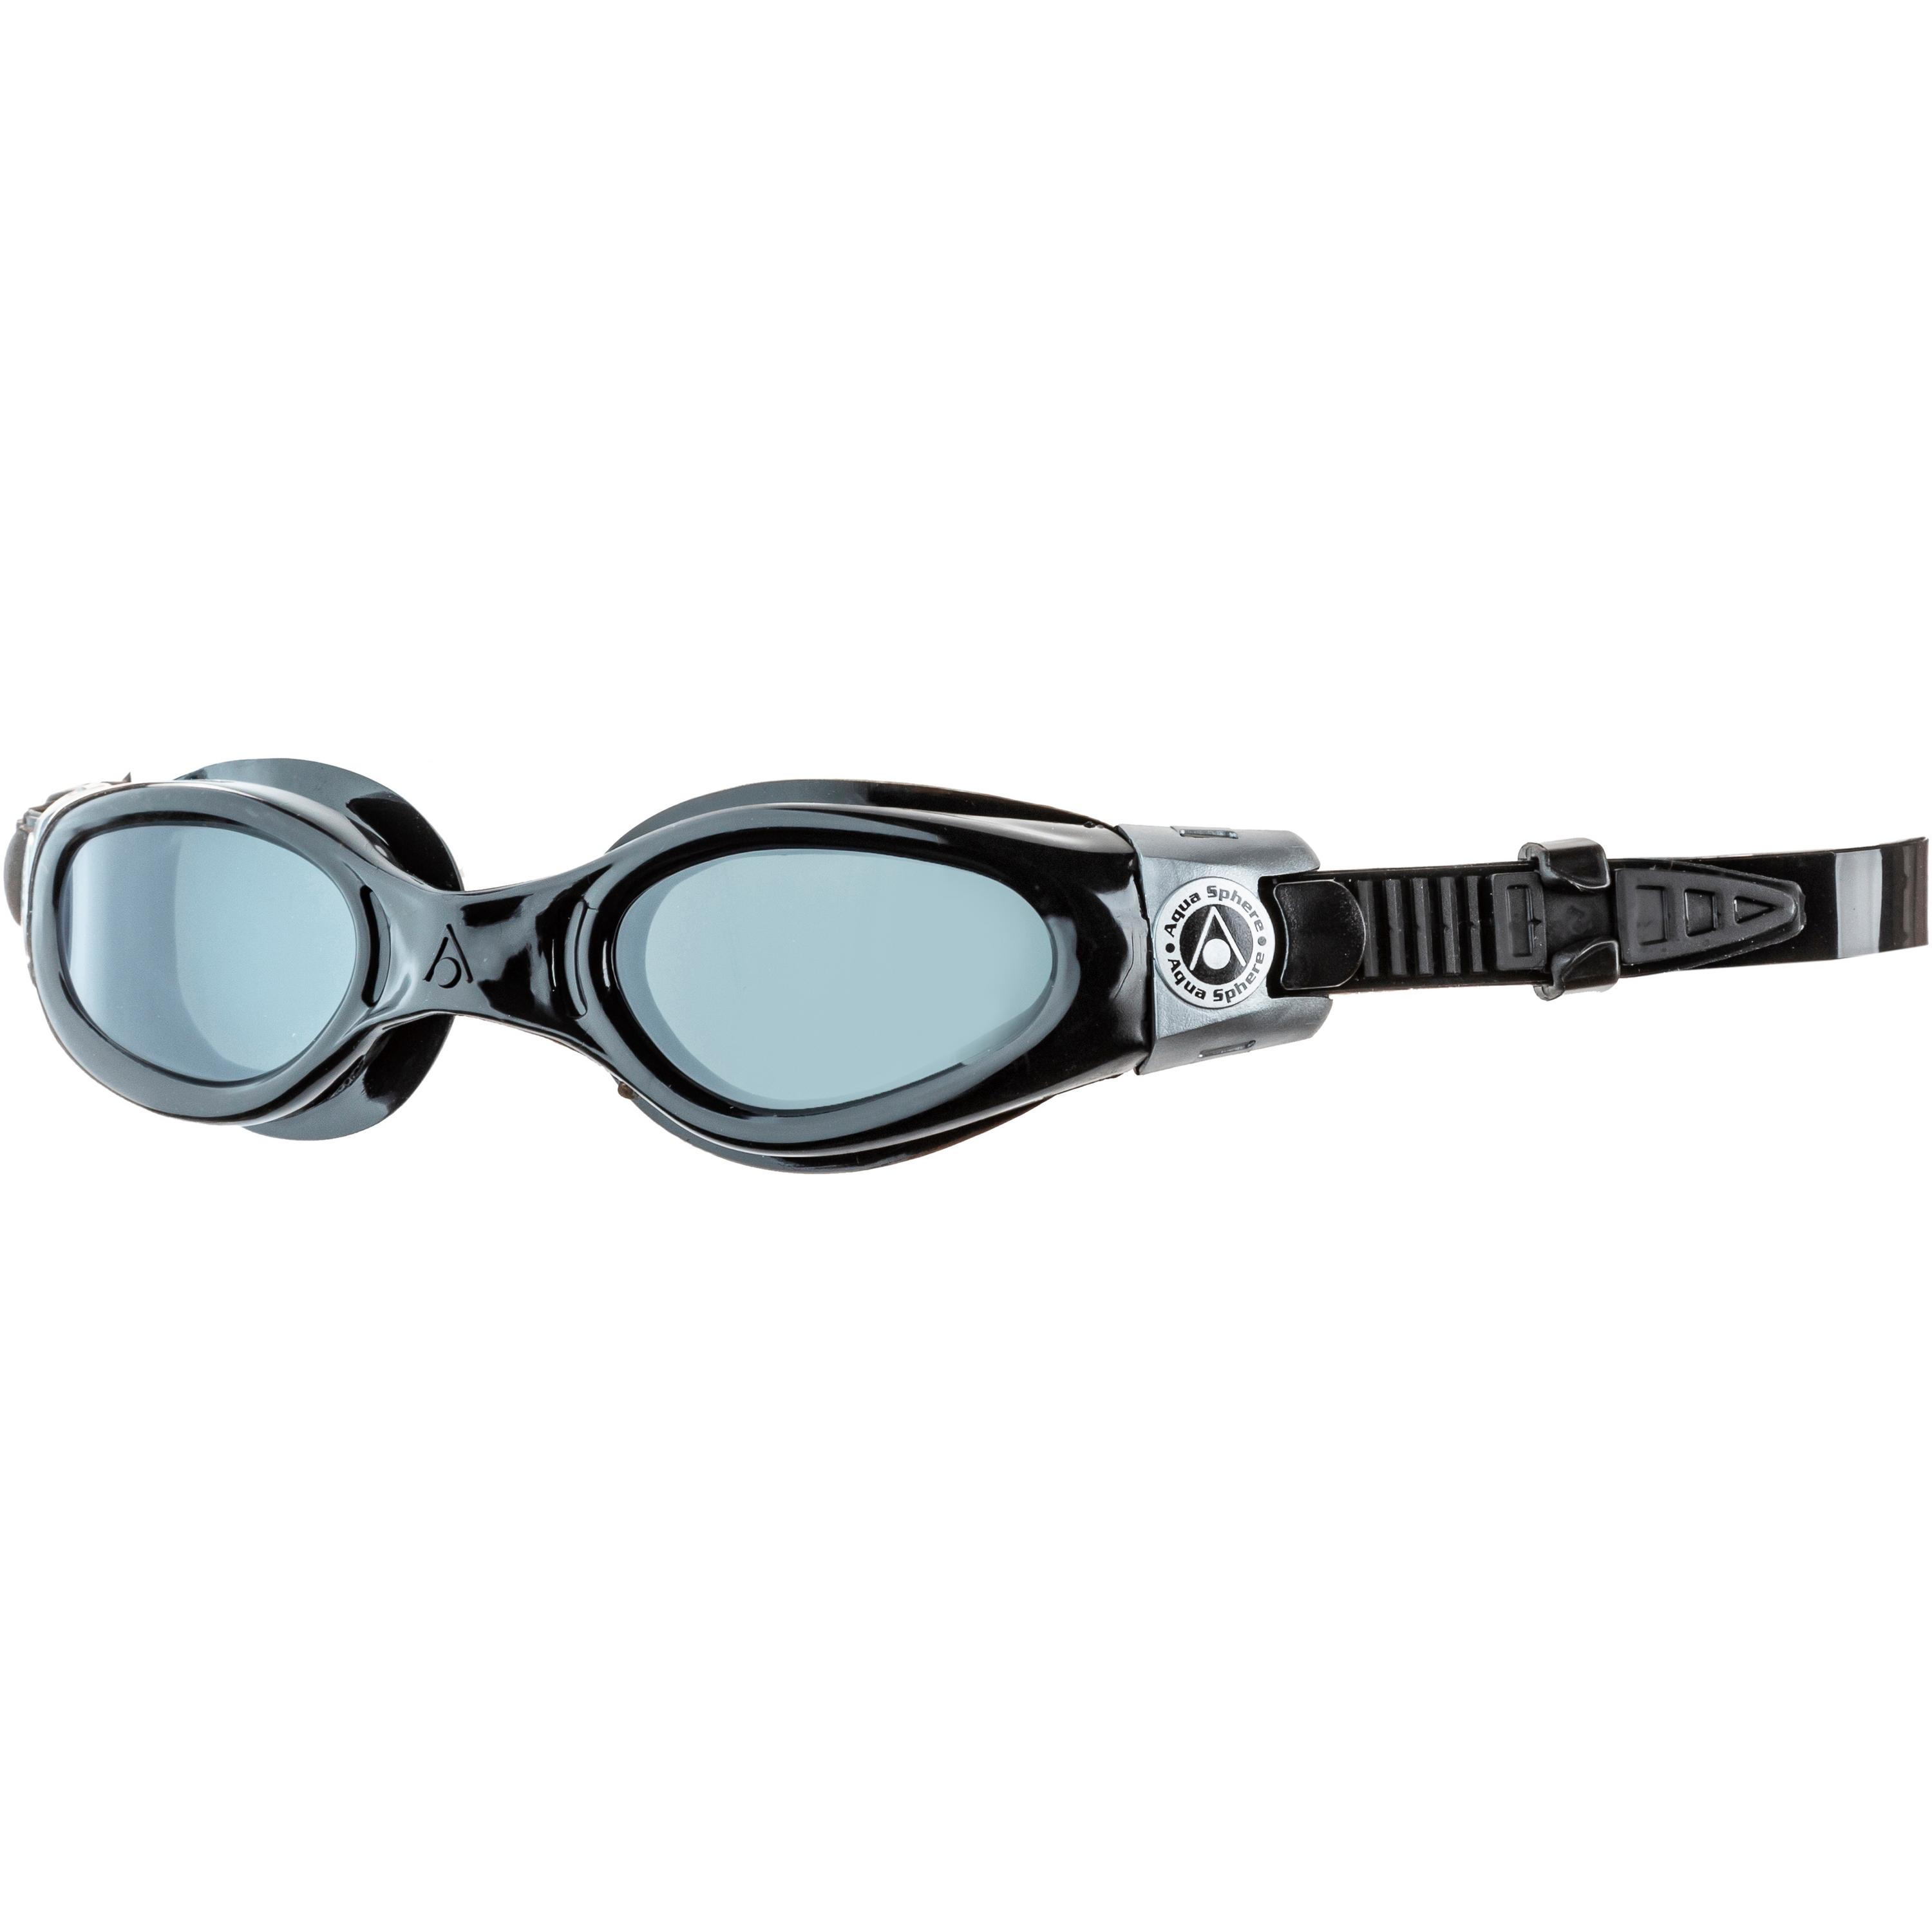 Image of Aquasphere Kaiman small Schwimmbrille